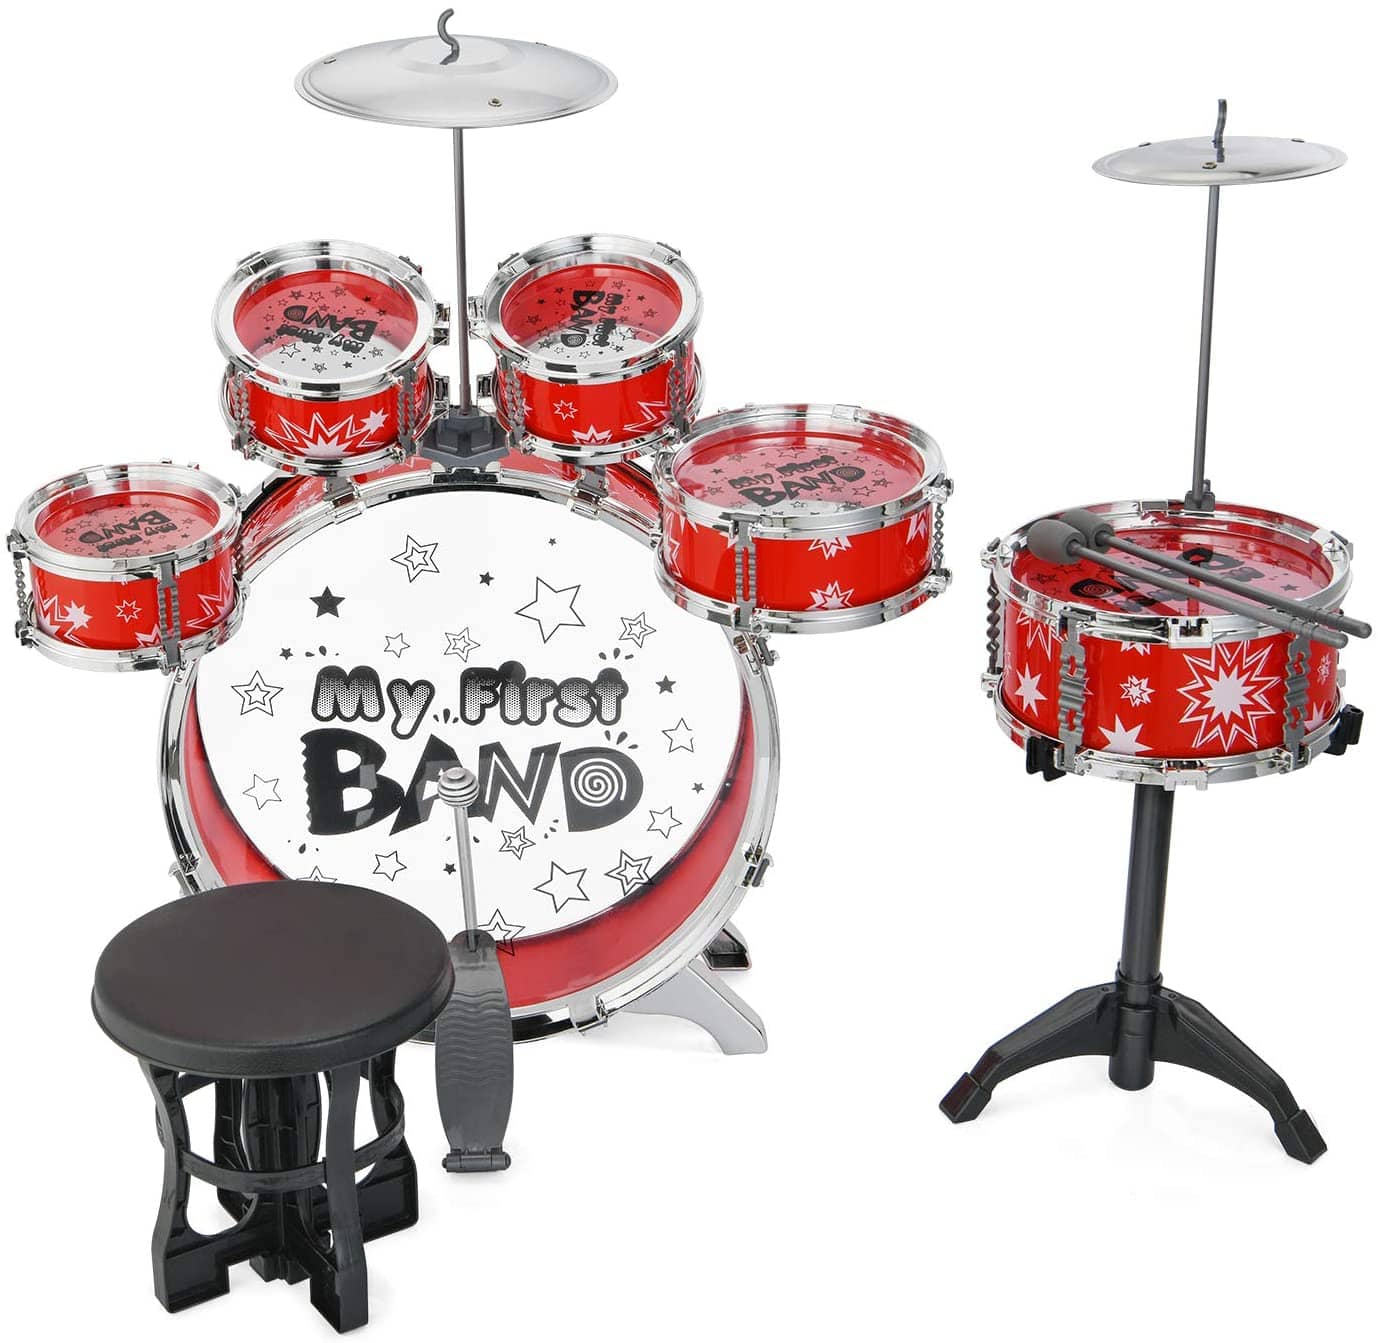 Reditmo Kids Jazz Drum Set, 6 Drums, 2 Cymbals, Chair, Kick Pedal, 2 Drumsticks, Stool, Early Education Musical Instrument to Develop Children’s Creativity, Red 9